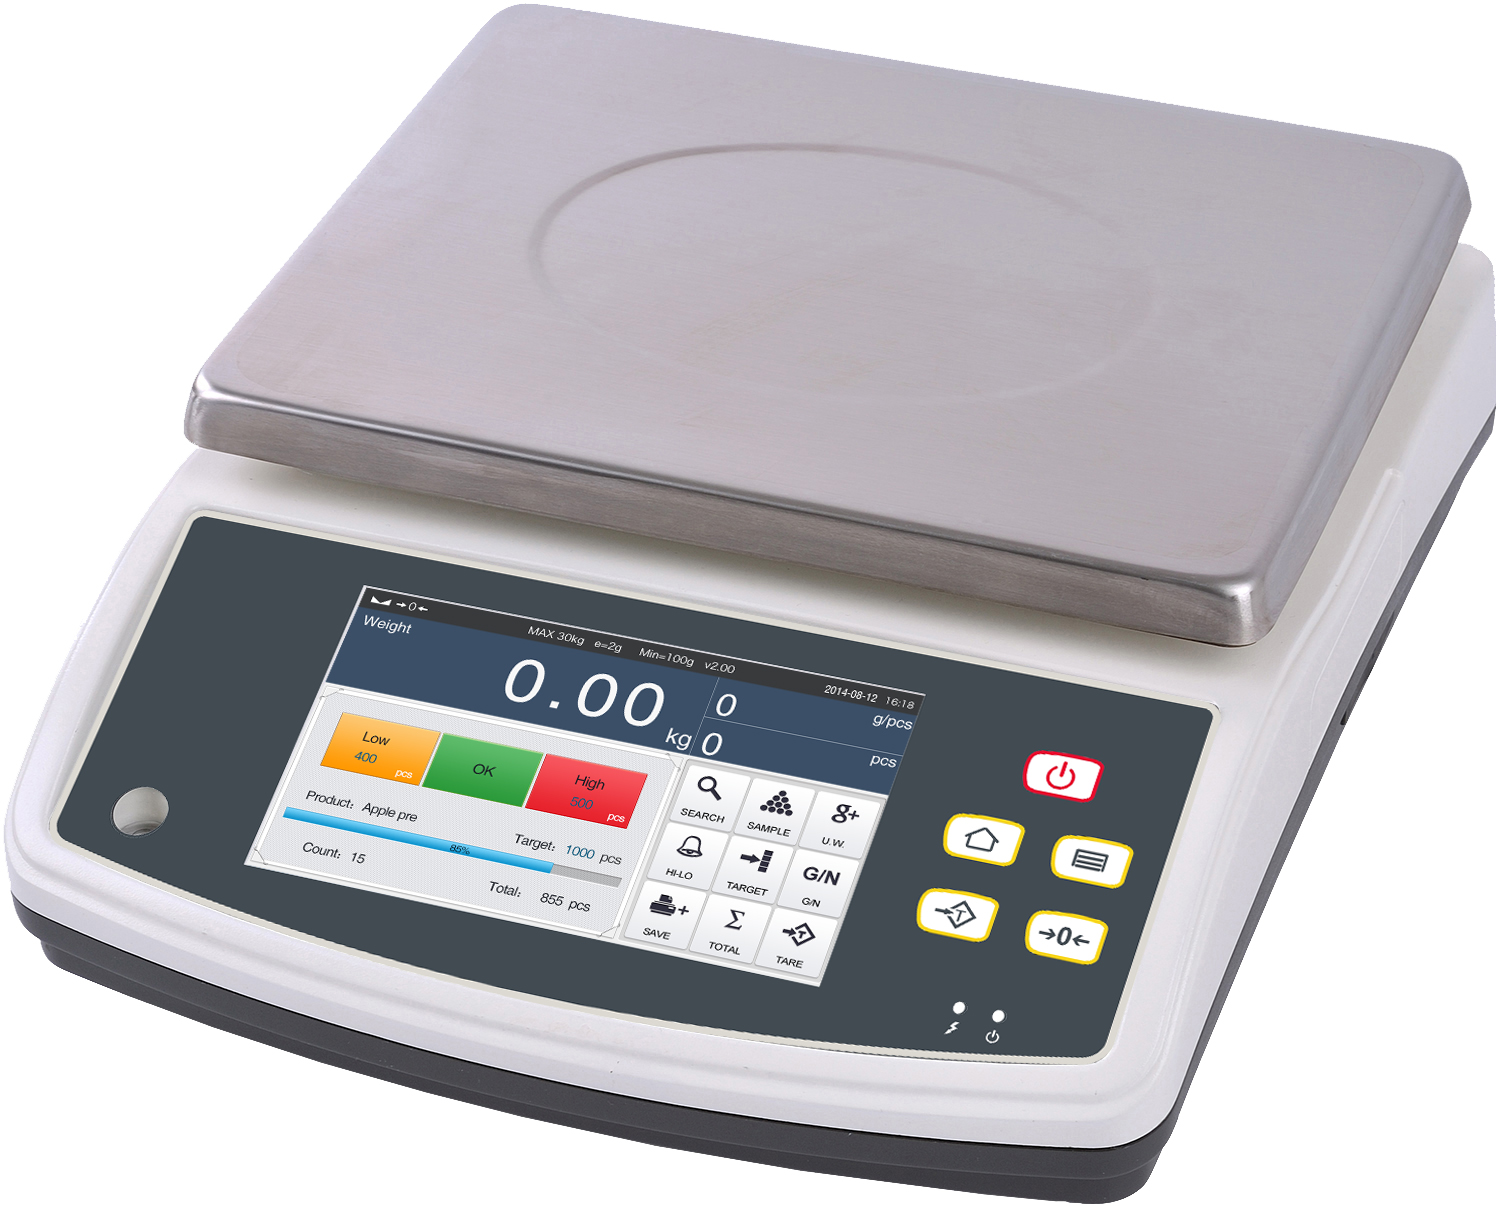 Image of a digital weighing scale